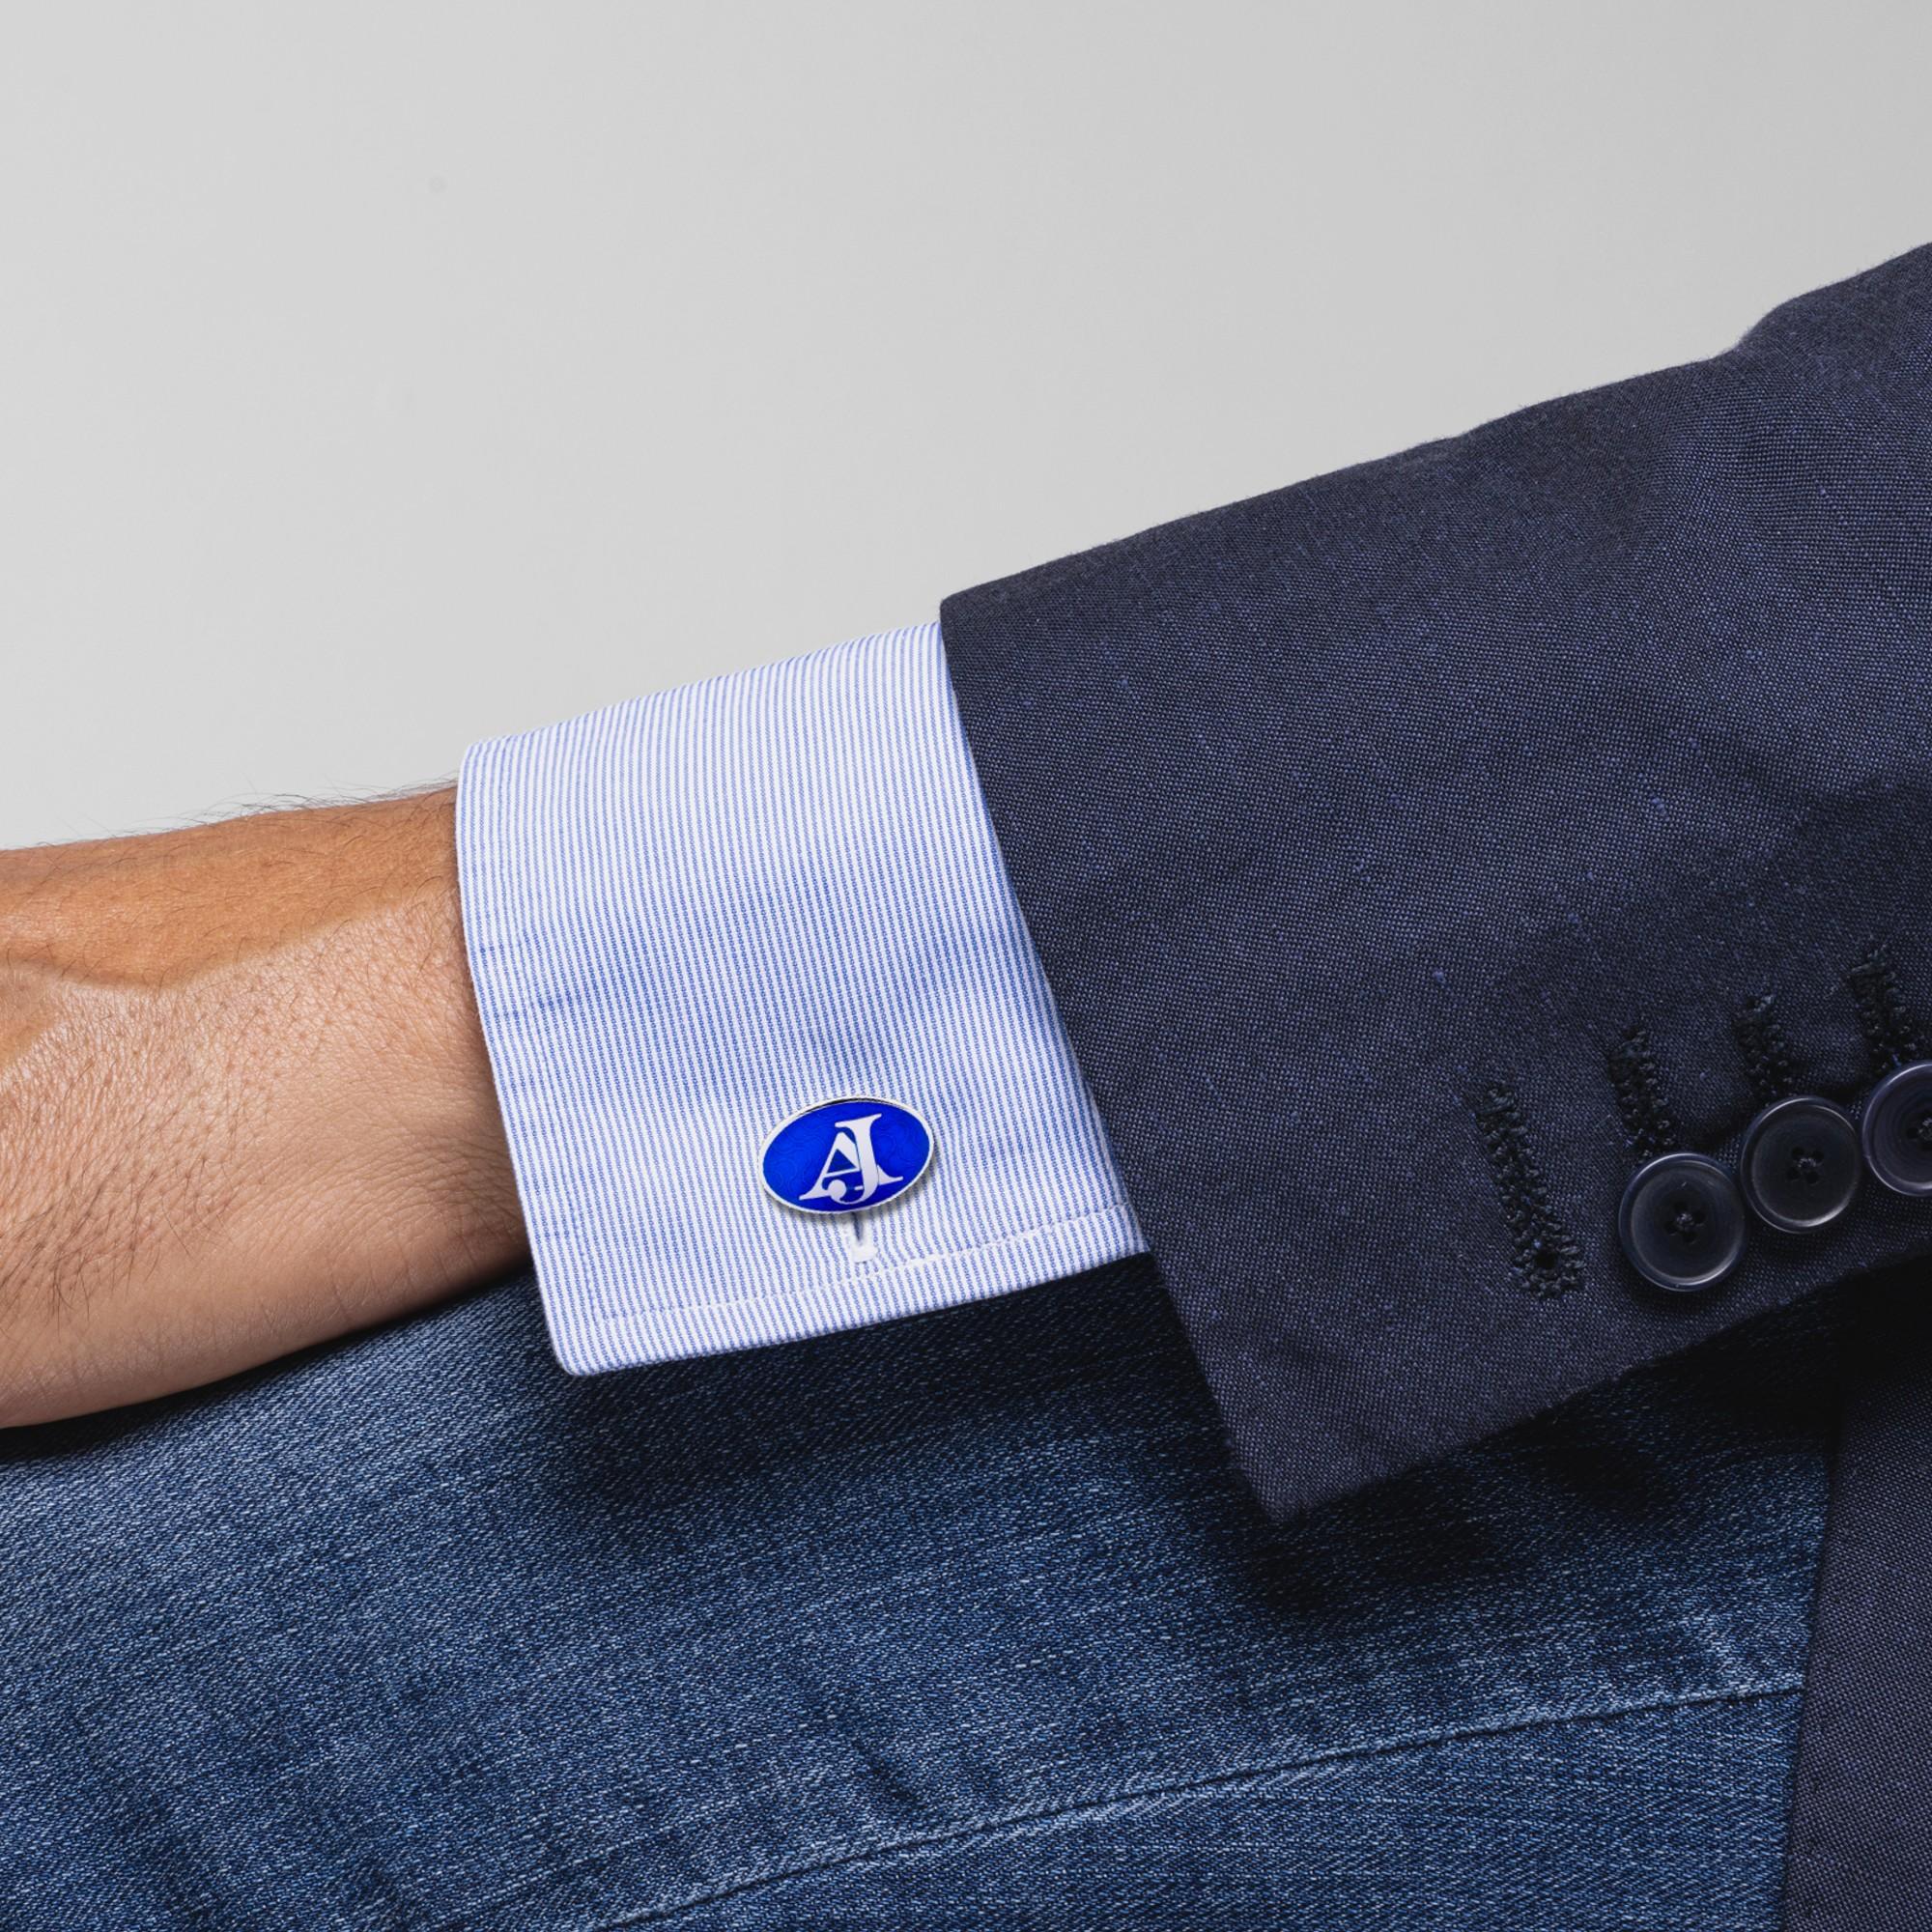 Alex Jona design collection, hand crafted in Italy, rhodium plated Sterling Silver cufflinks with custom made to order Initials with blue enamel or other color. 
The production lead time for these cufflinks with the customer's own initials takes two